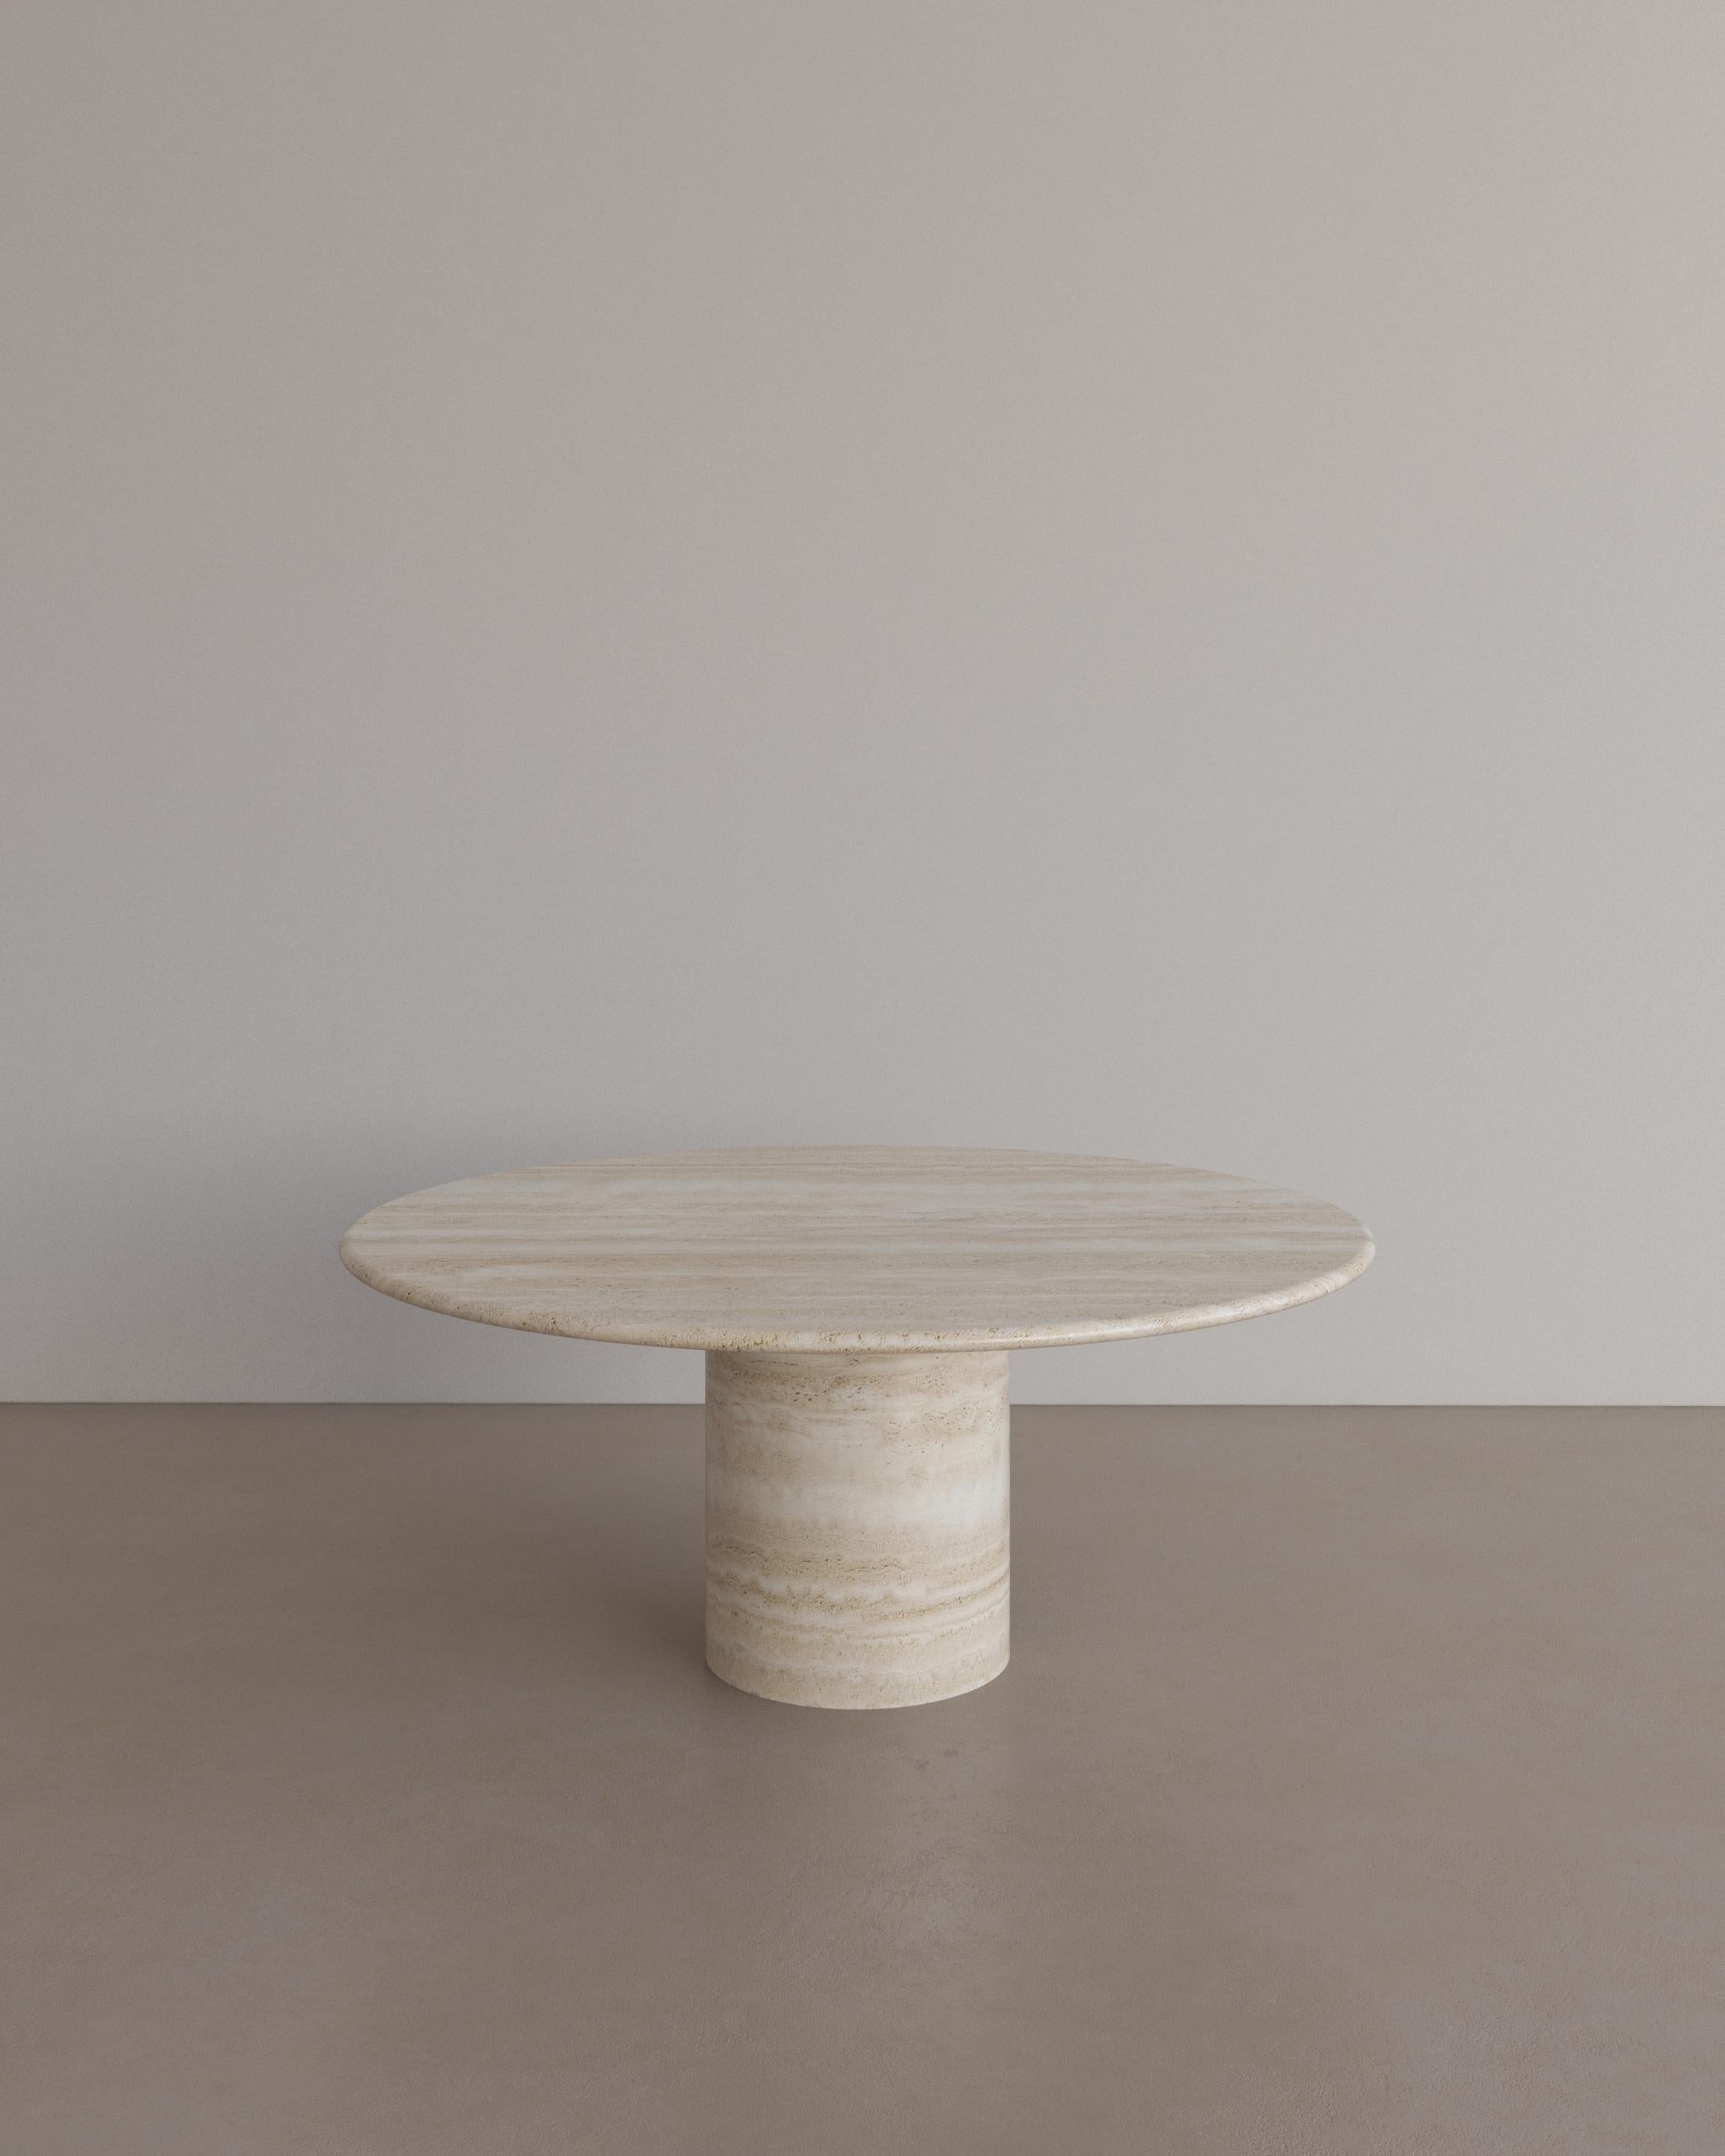 The Voyage Coffee Table II in Nude Travertine celebrates the simple pleasures that define life and replenish the soul through harnessing essential form. Envisioned as an ode to historical elegance, captured through a modern lens of minimalistic